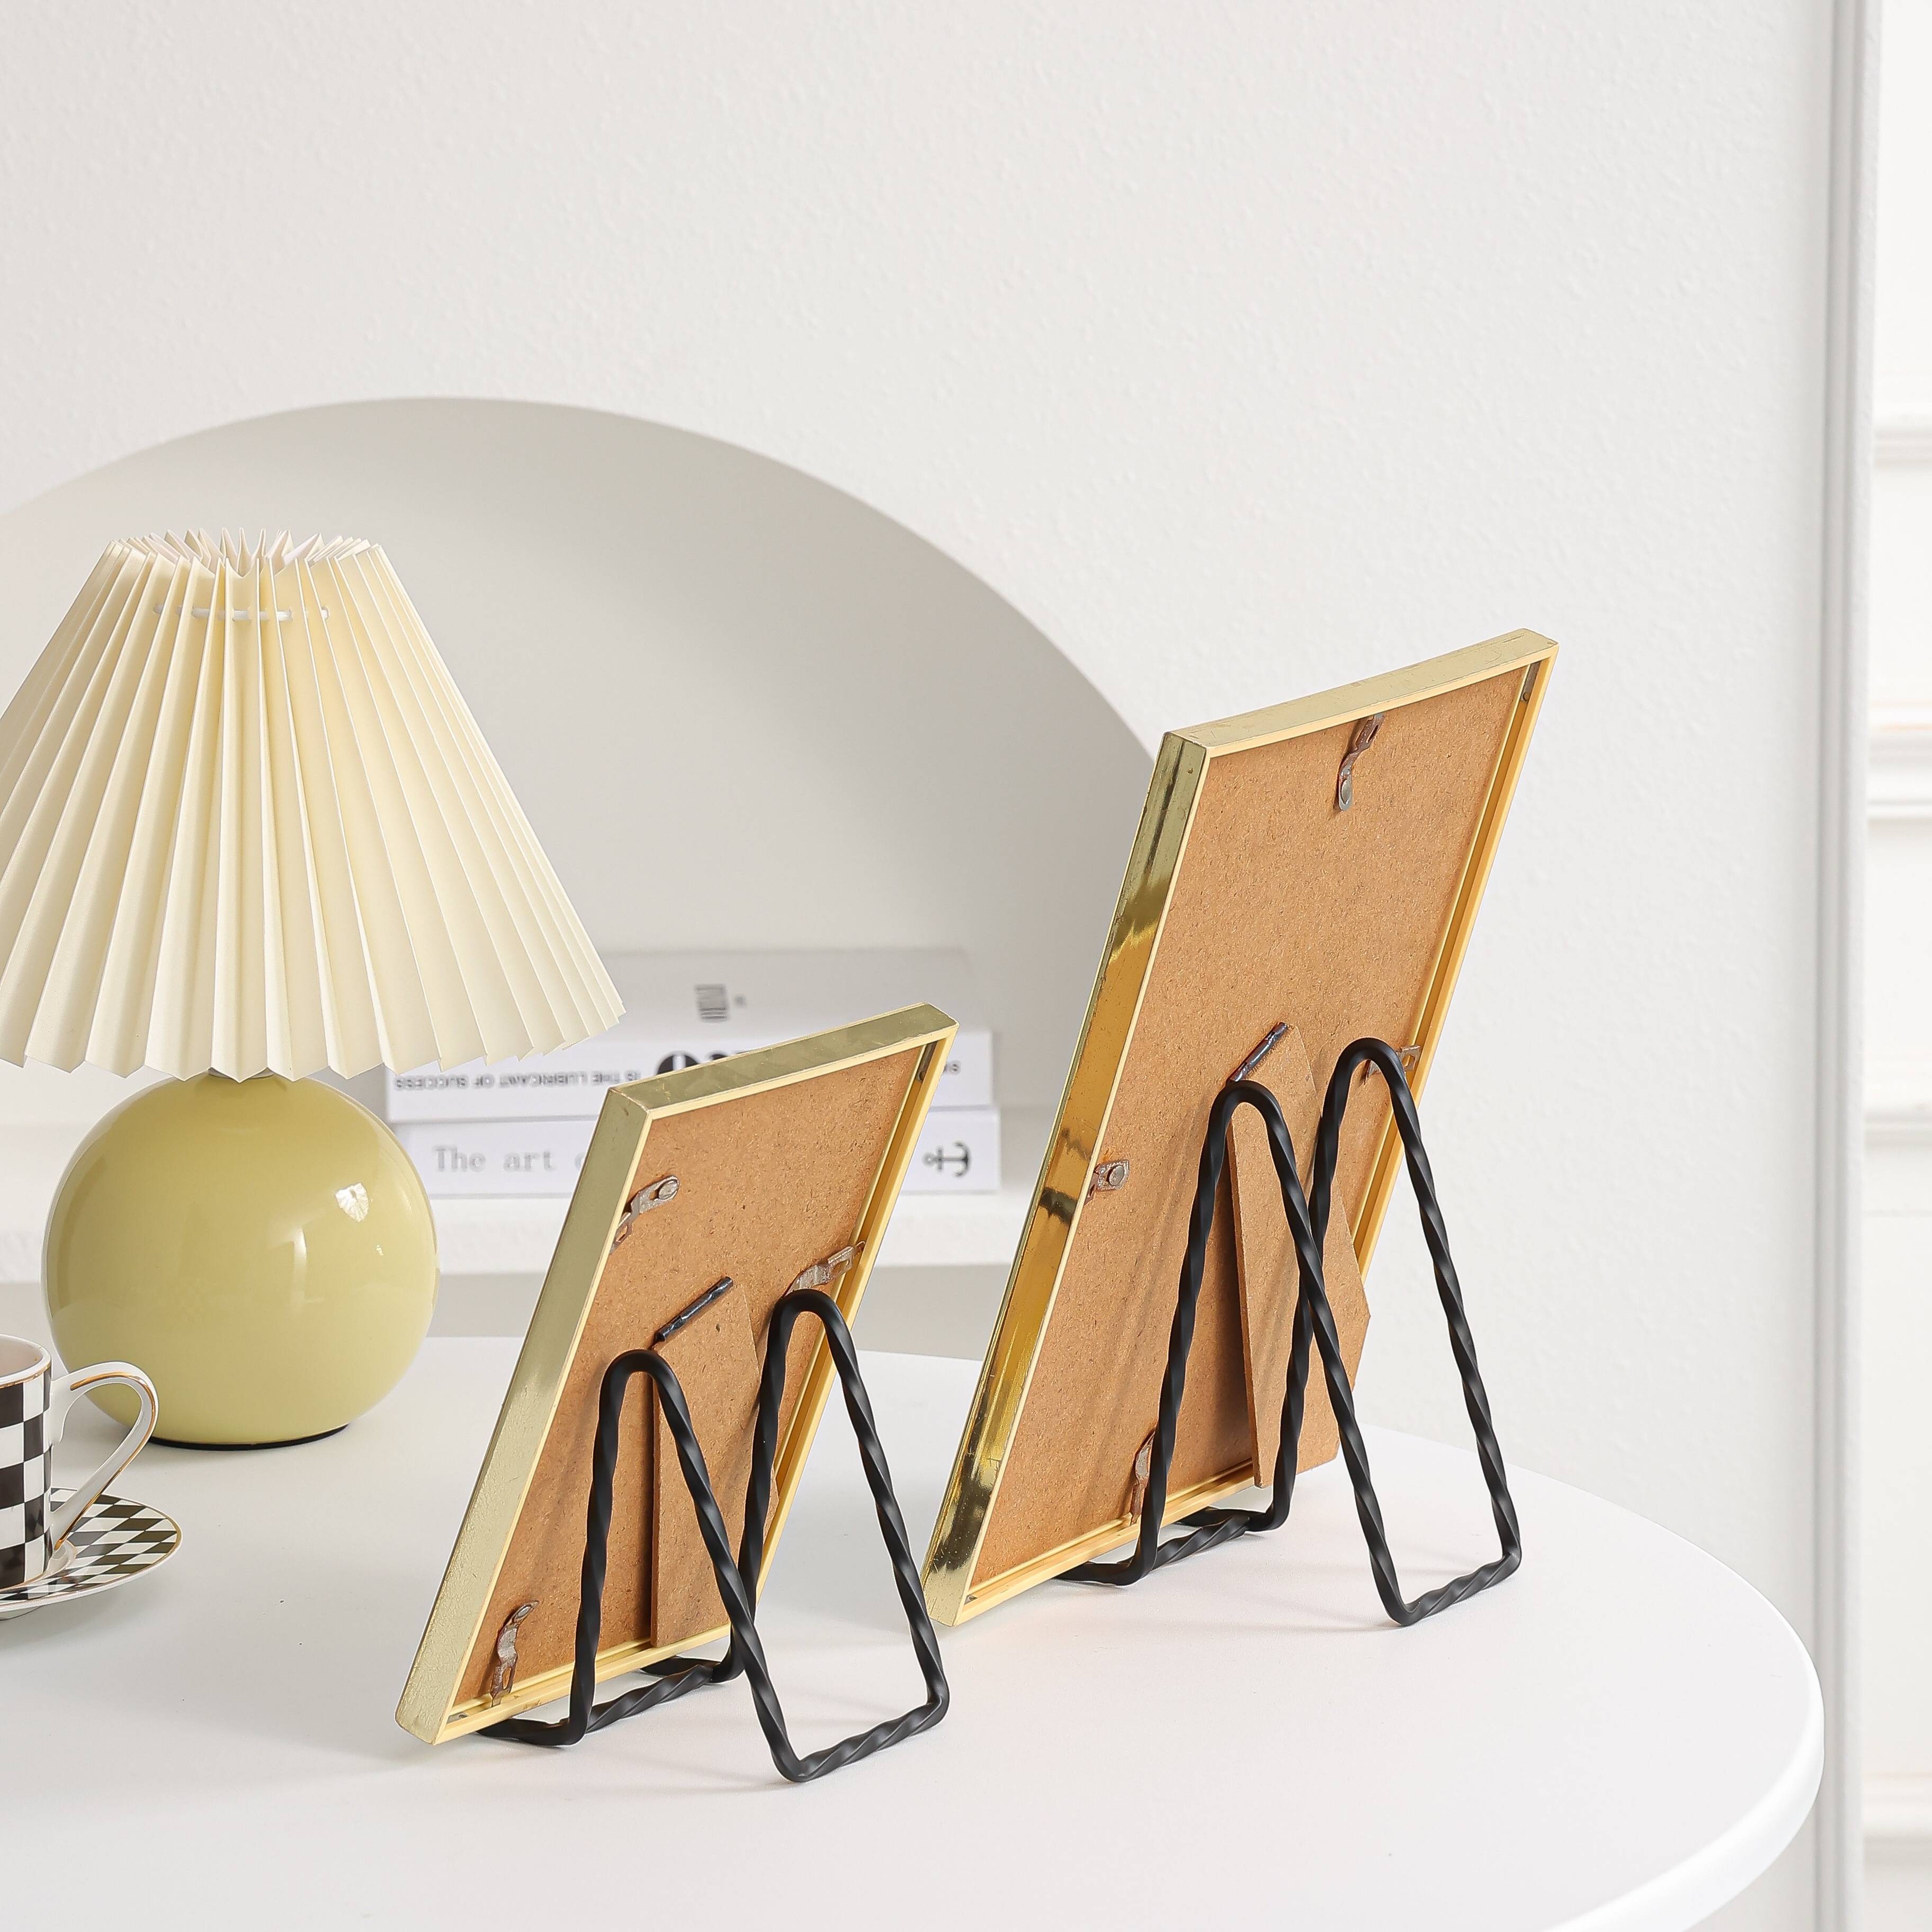  Plate Holder Easel Display Stand - 8 inch Metal Plate Stands  for Display - Tabletop Picture Stand - Gold Iron Easels for Display  Pictures, Photo Frames, Book